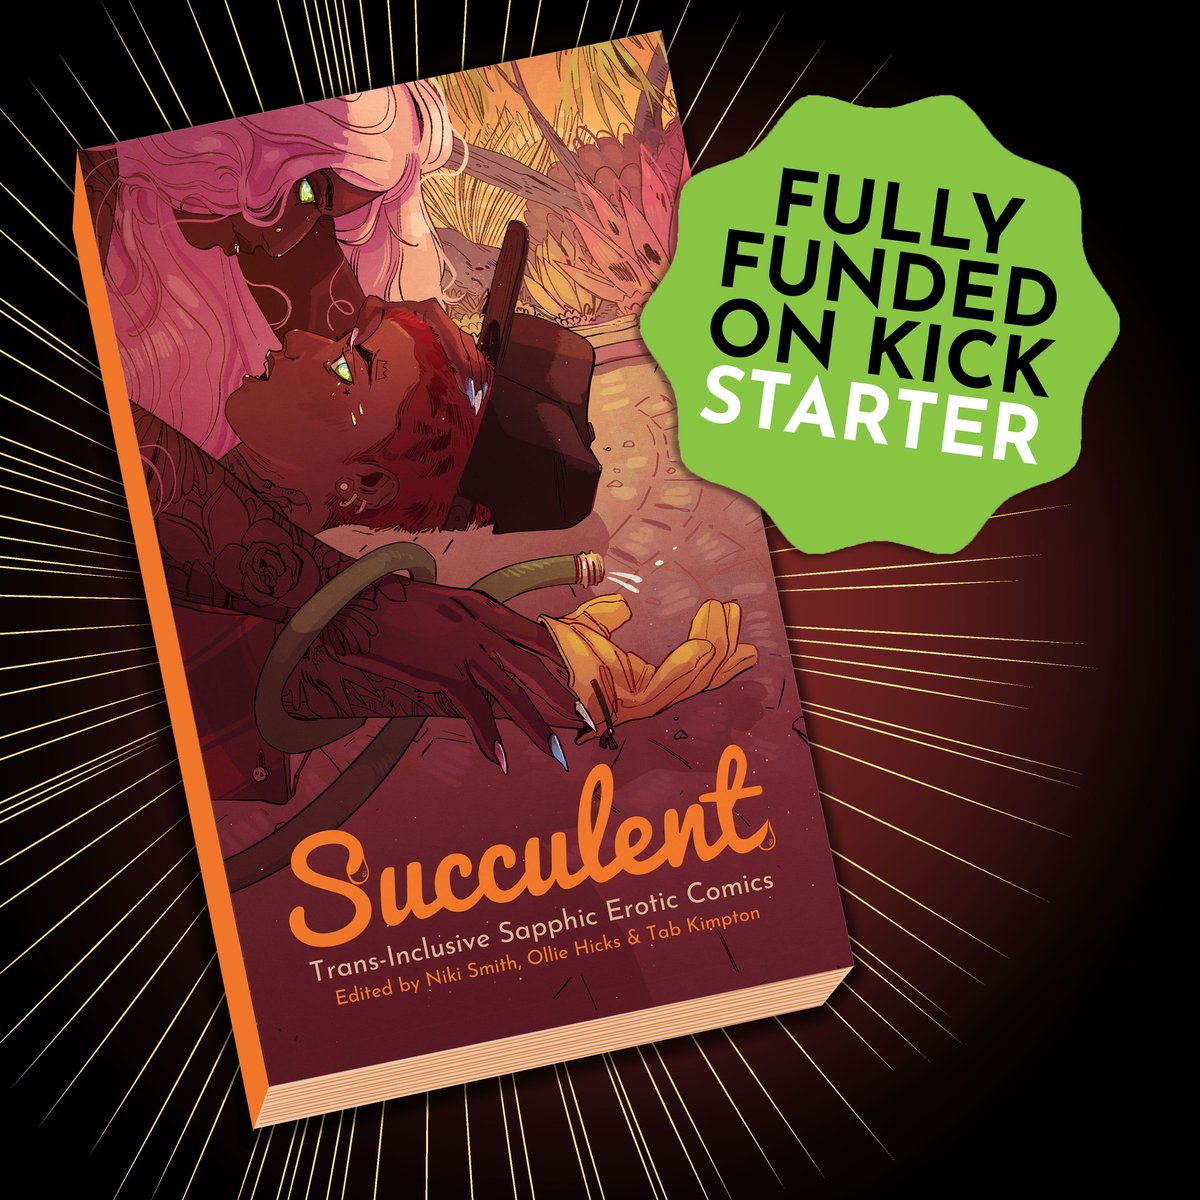 Succulent funded this weekend! 💦 🌿 Thanks so much everyone for your support. Any money we now make in the next 9 days go towards our bonus goals- paying our artists more! For every £2K over £28K, each story will be paid an extra £40 with no limit on these raises.